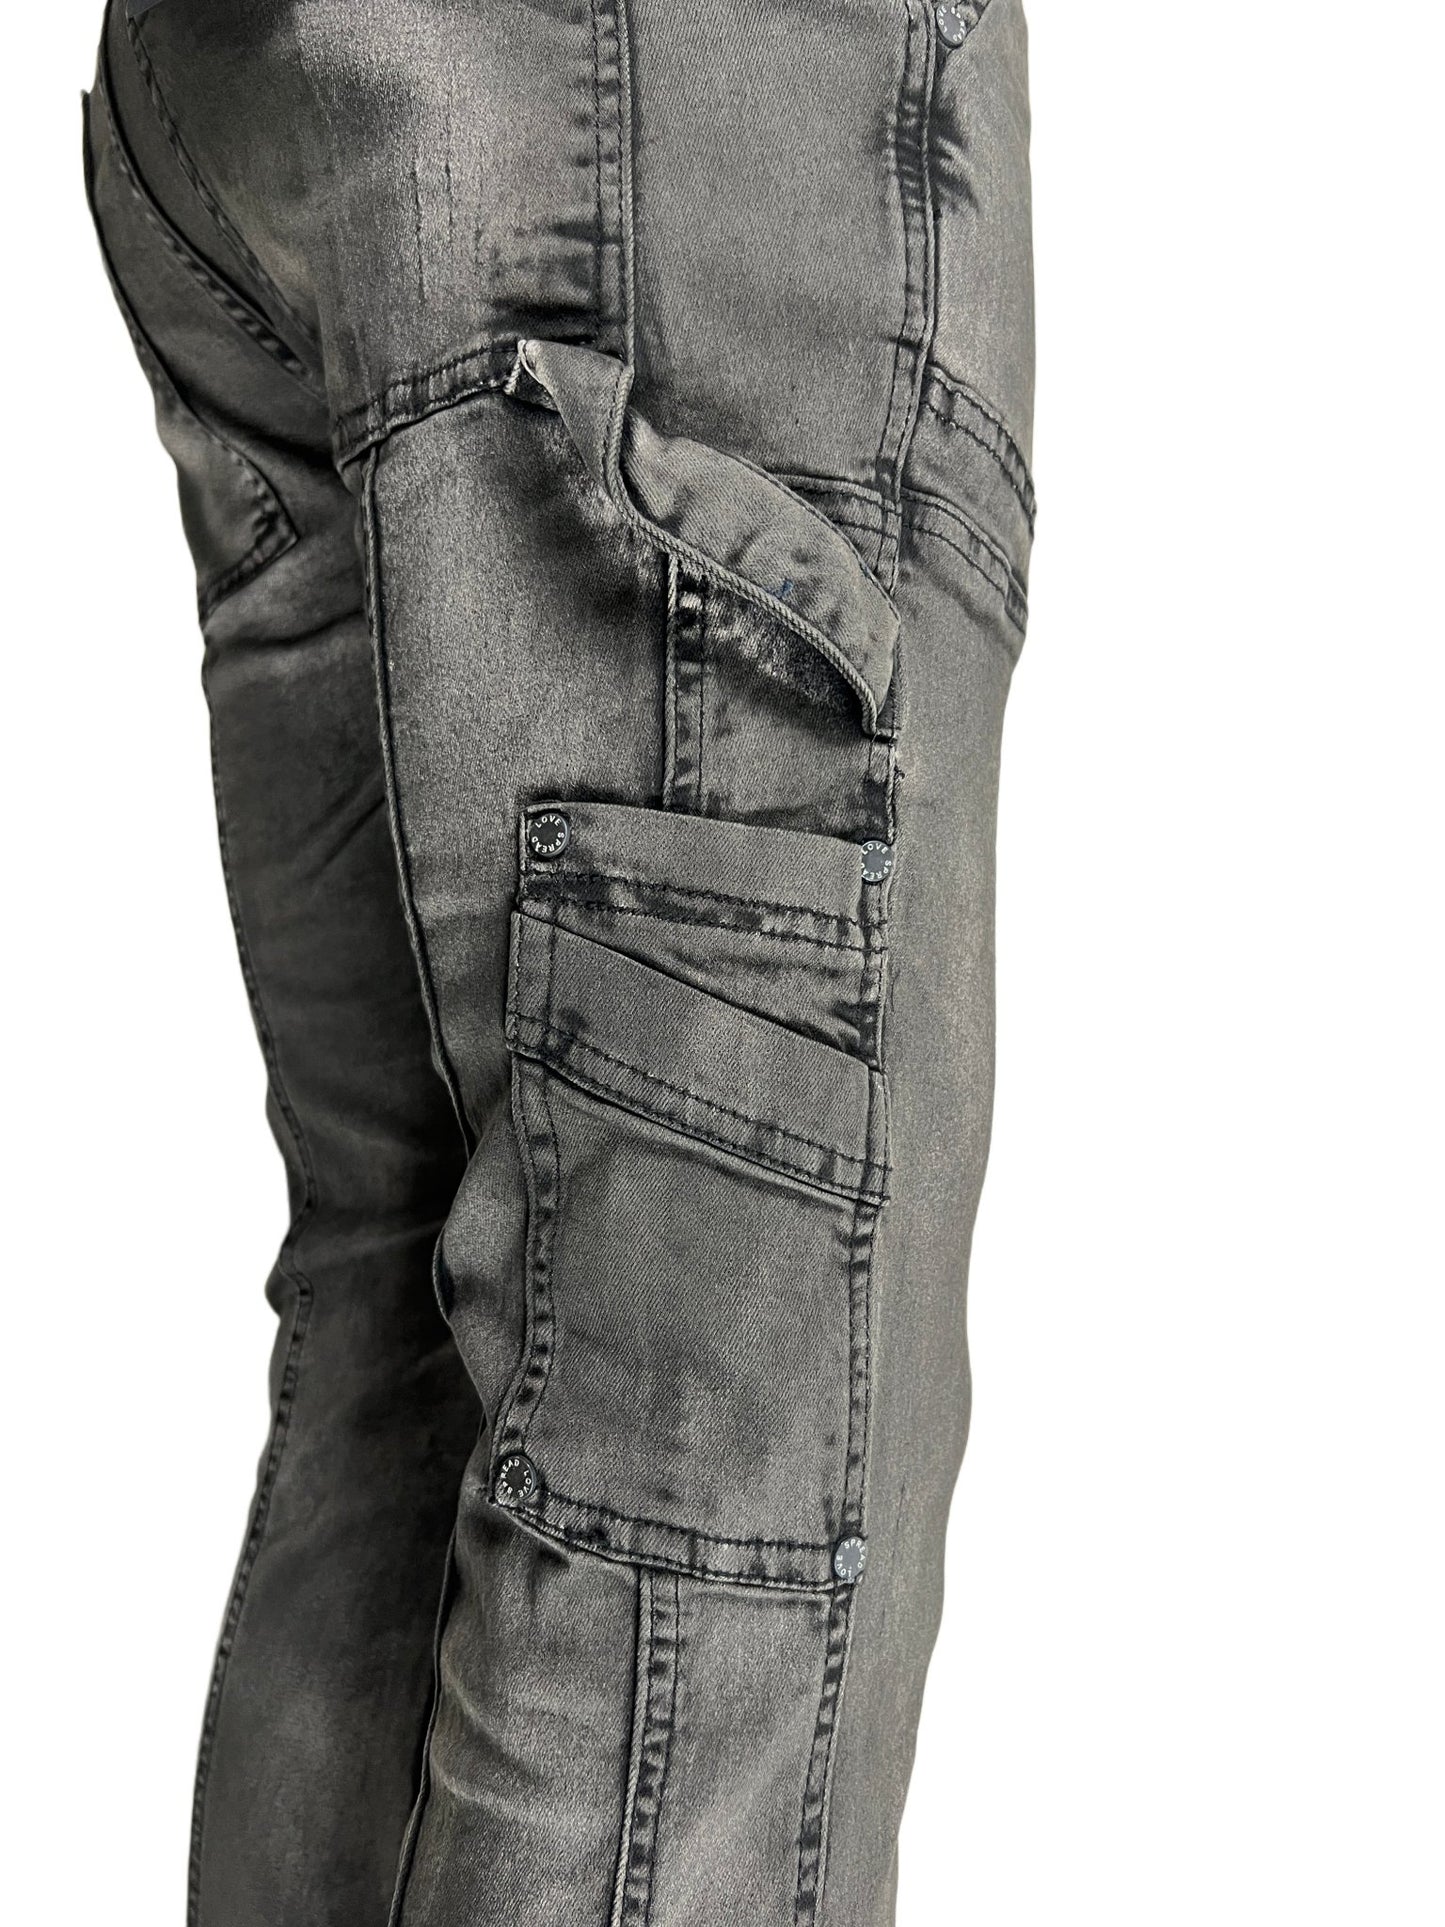 Probus SERENEDE RAIN STACKED JEANS GREY 28